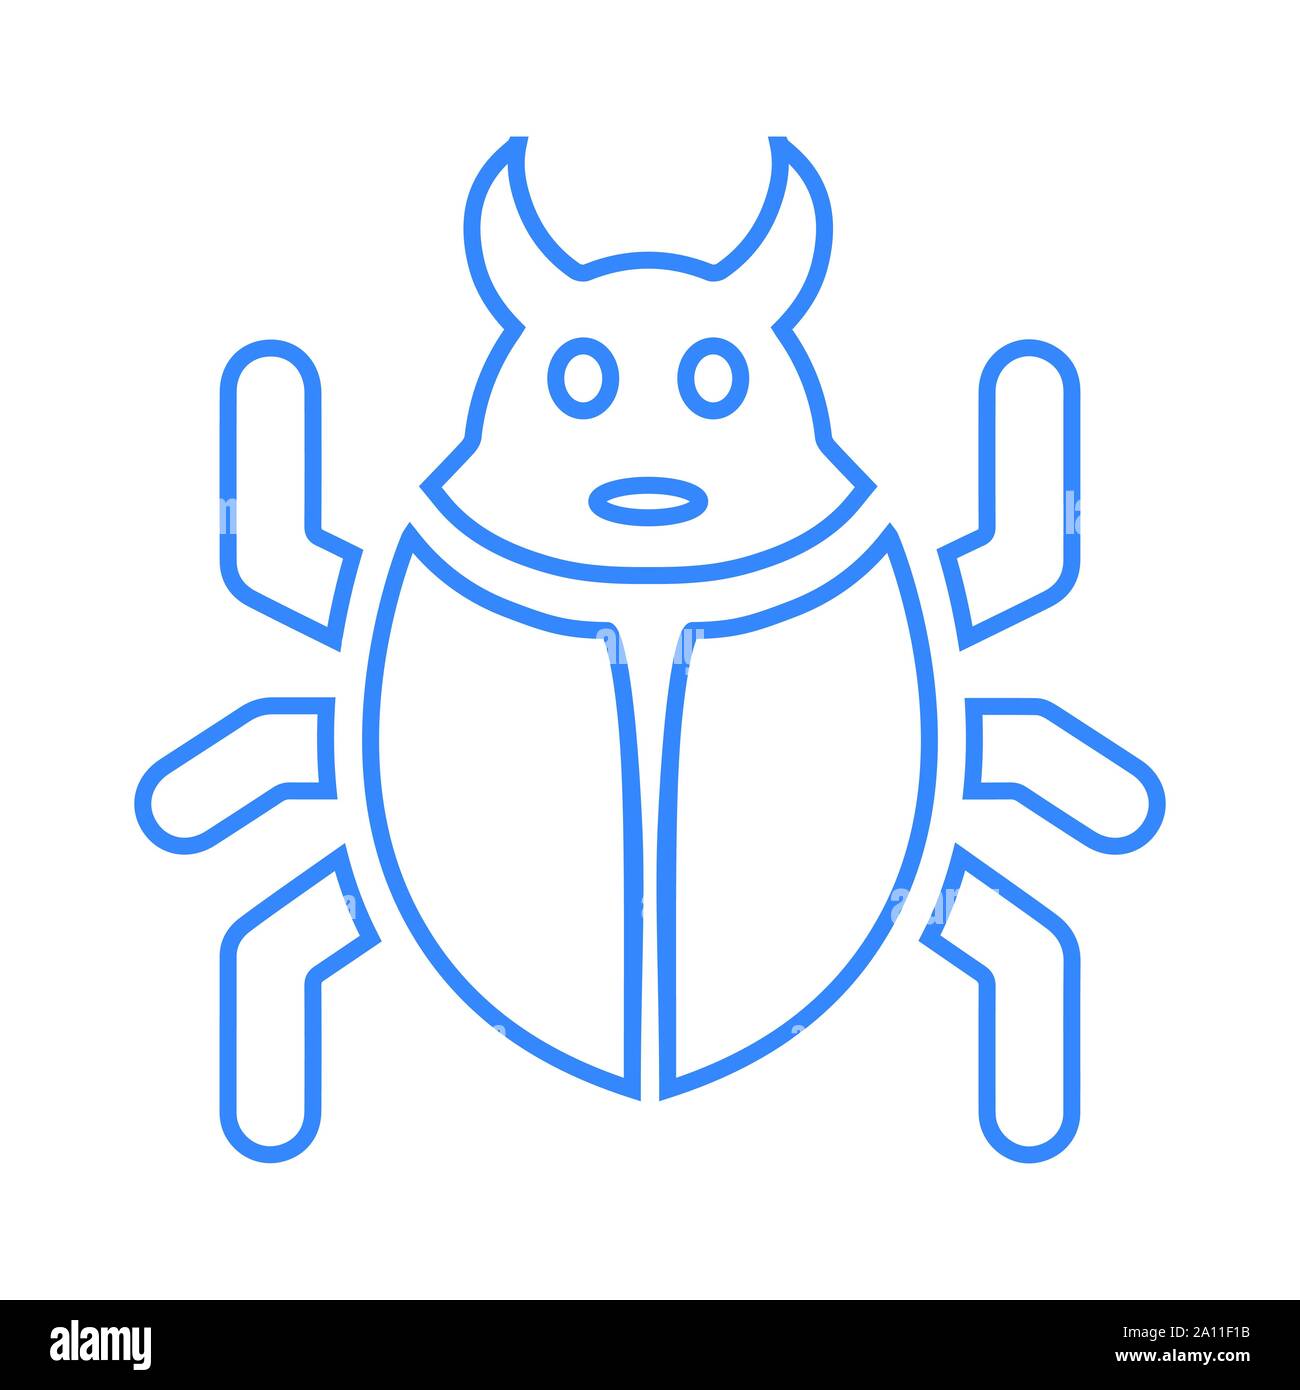 Beautiful design and fully editable Bug, fixing, repair, reparation, weak side, lapsus icon for commercial, print media, web or any type of design pro Stock Vector